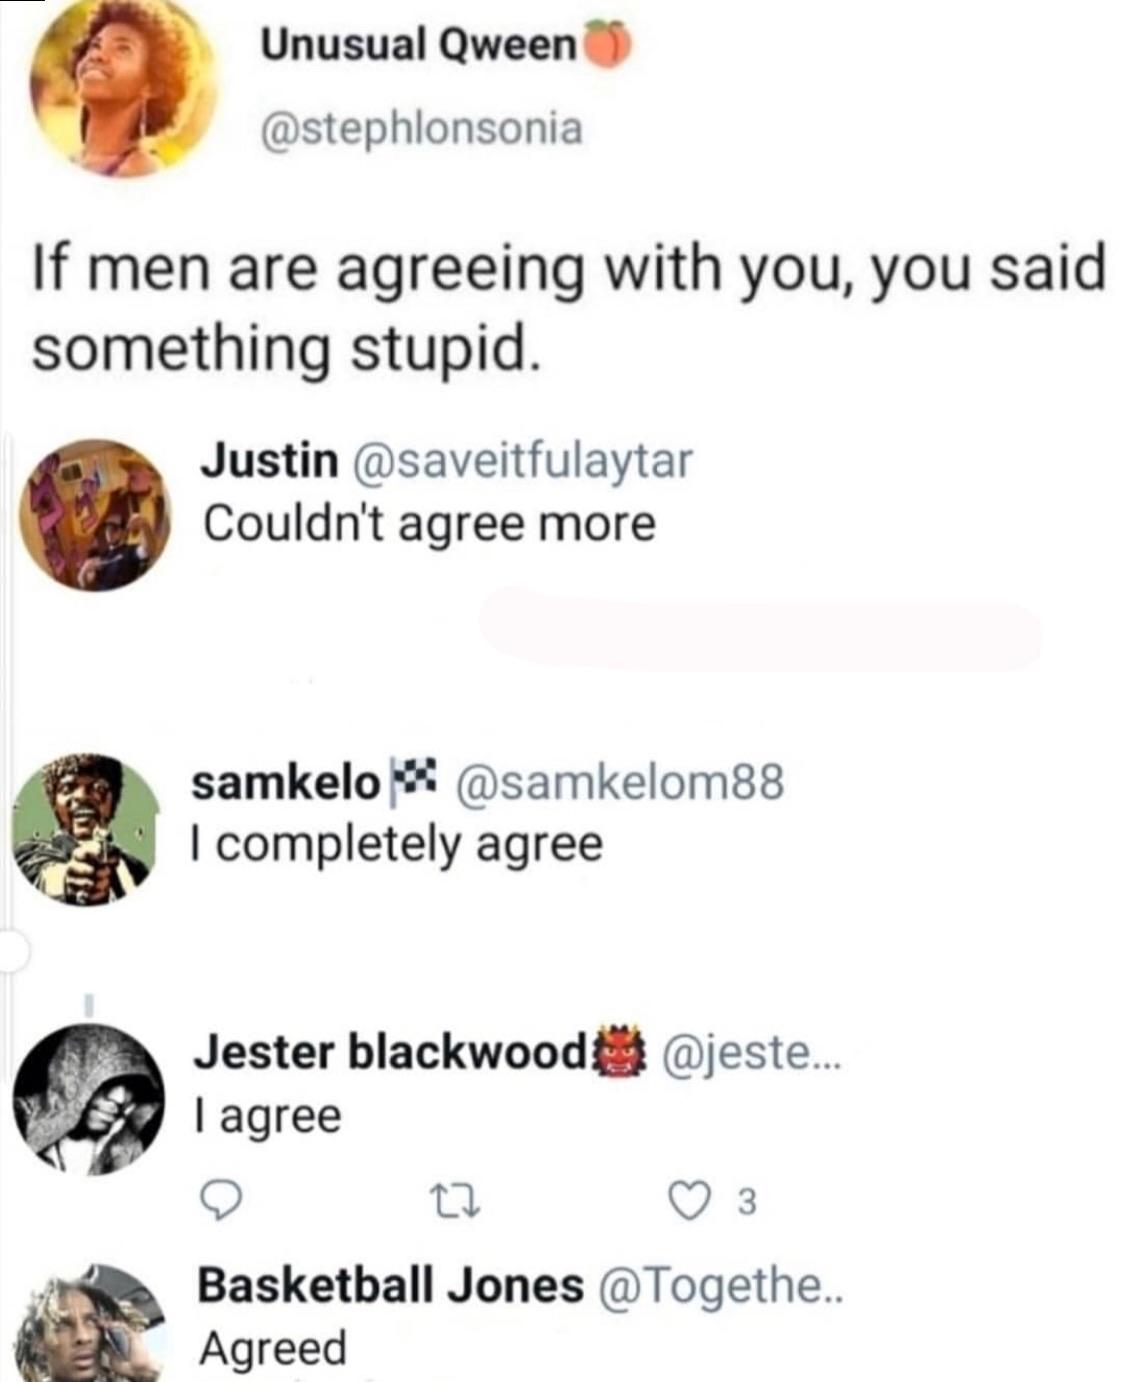 Unusual Qween If men are agreeing with you, you said something stupid. Justin Couldn't agree more samkelo X I completely agree Jester blackwood ... I agree 9 22 3 Basketball Jones .. Agreed